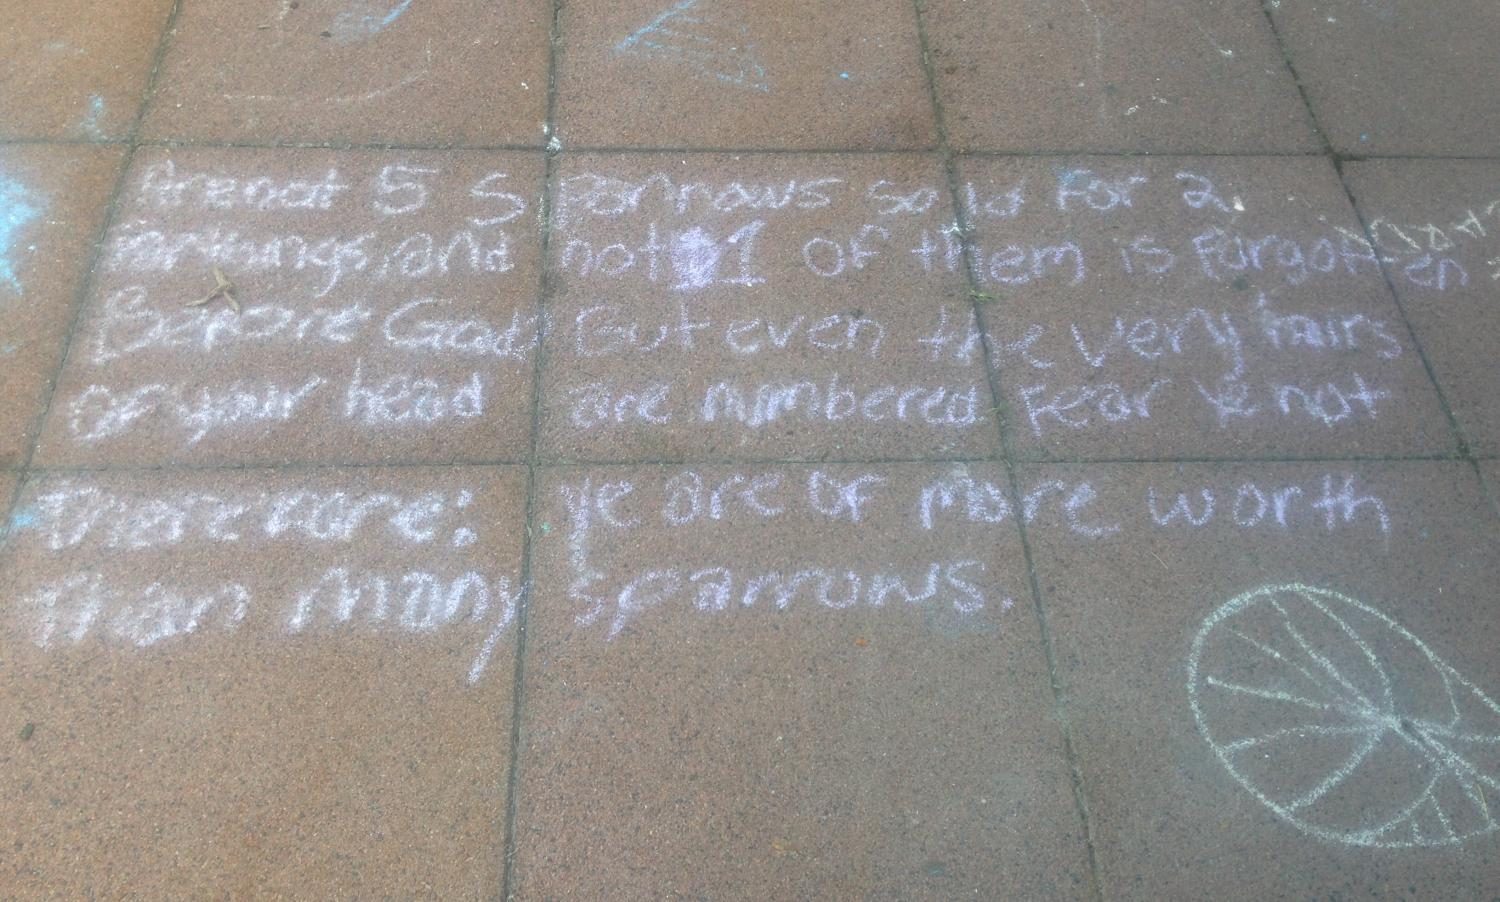 Christadelphian children left their mark on Lakeland’s concrete. The scrawling pictured quotes Luke 12:6-7 from the King James Version of the Bible.